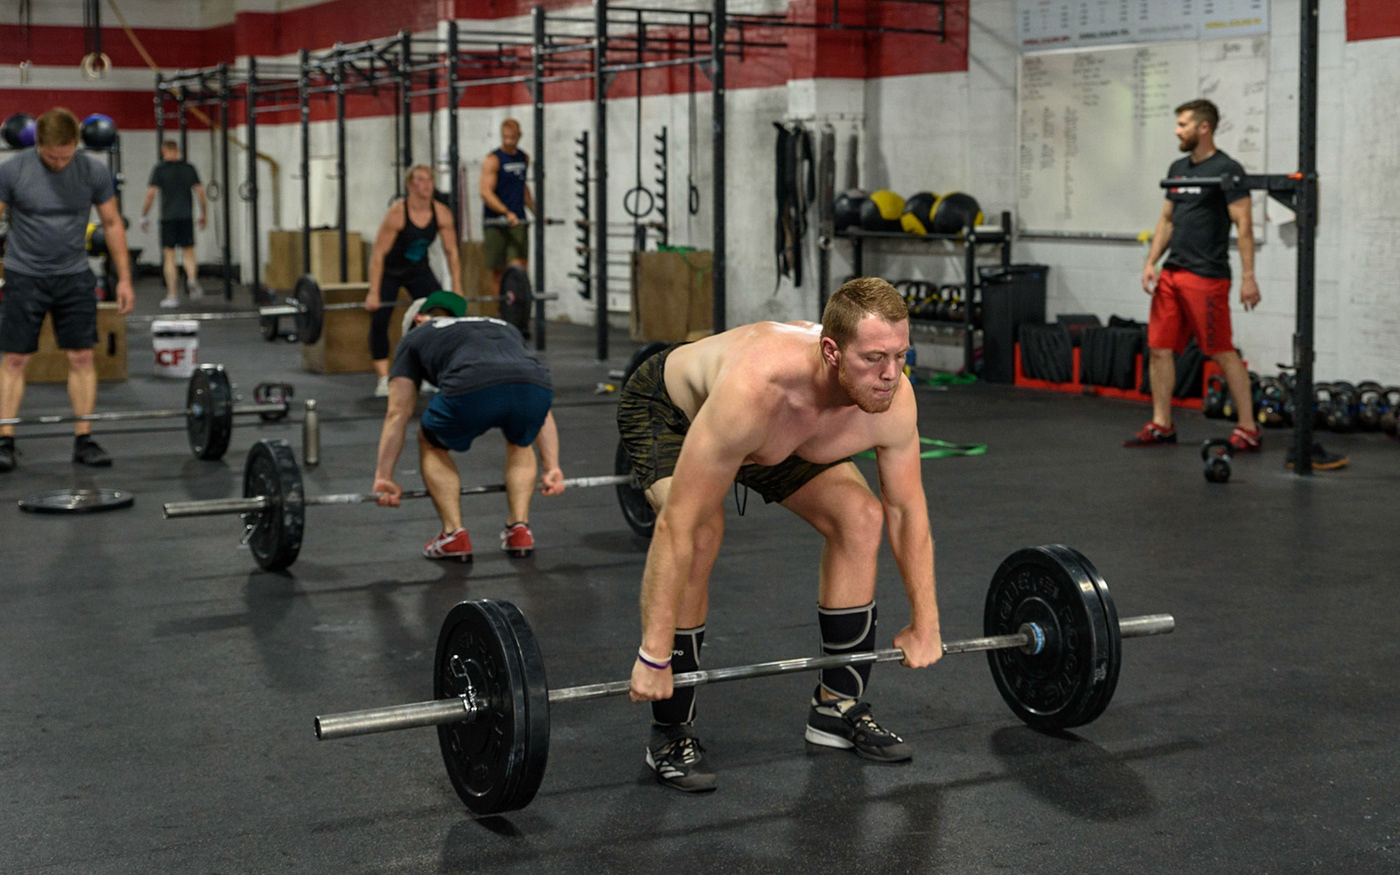 washington dc District CrossFit waterfront Crossfit WOD weights Burpee deadflift power cleans Muscle Ups